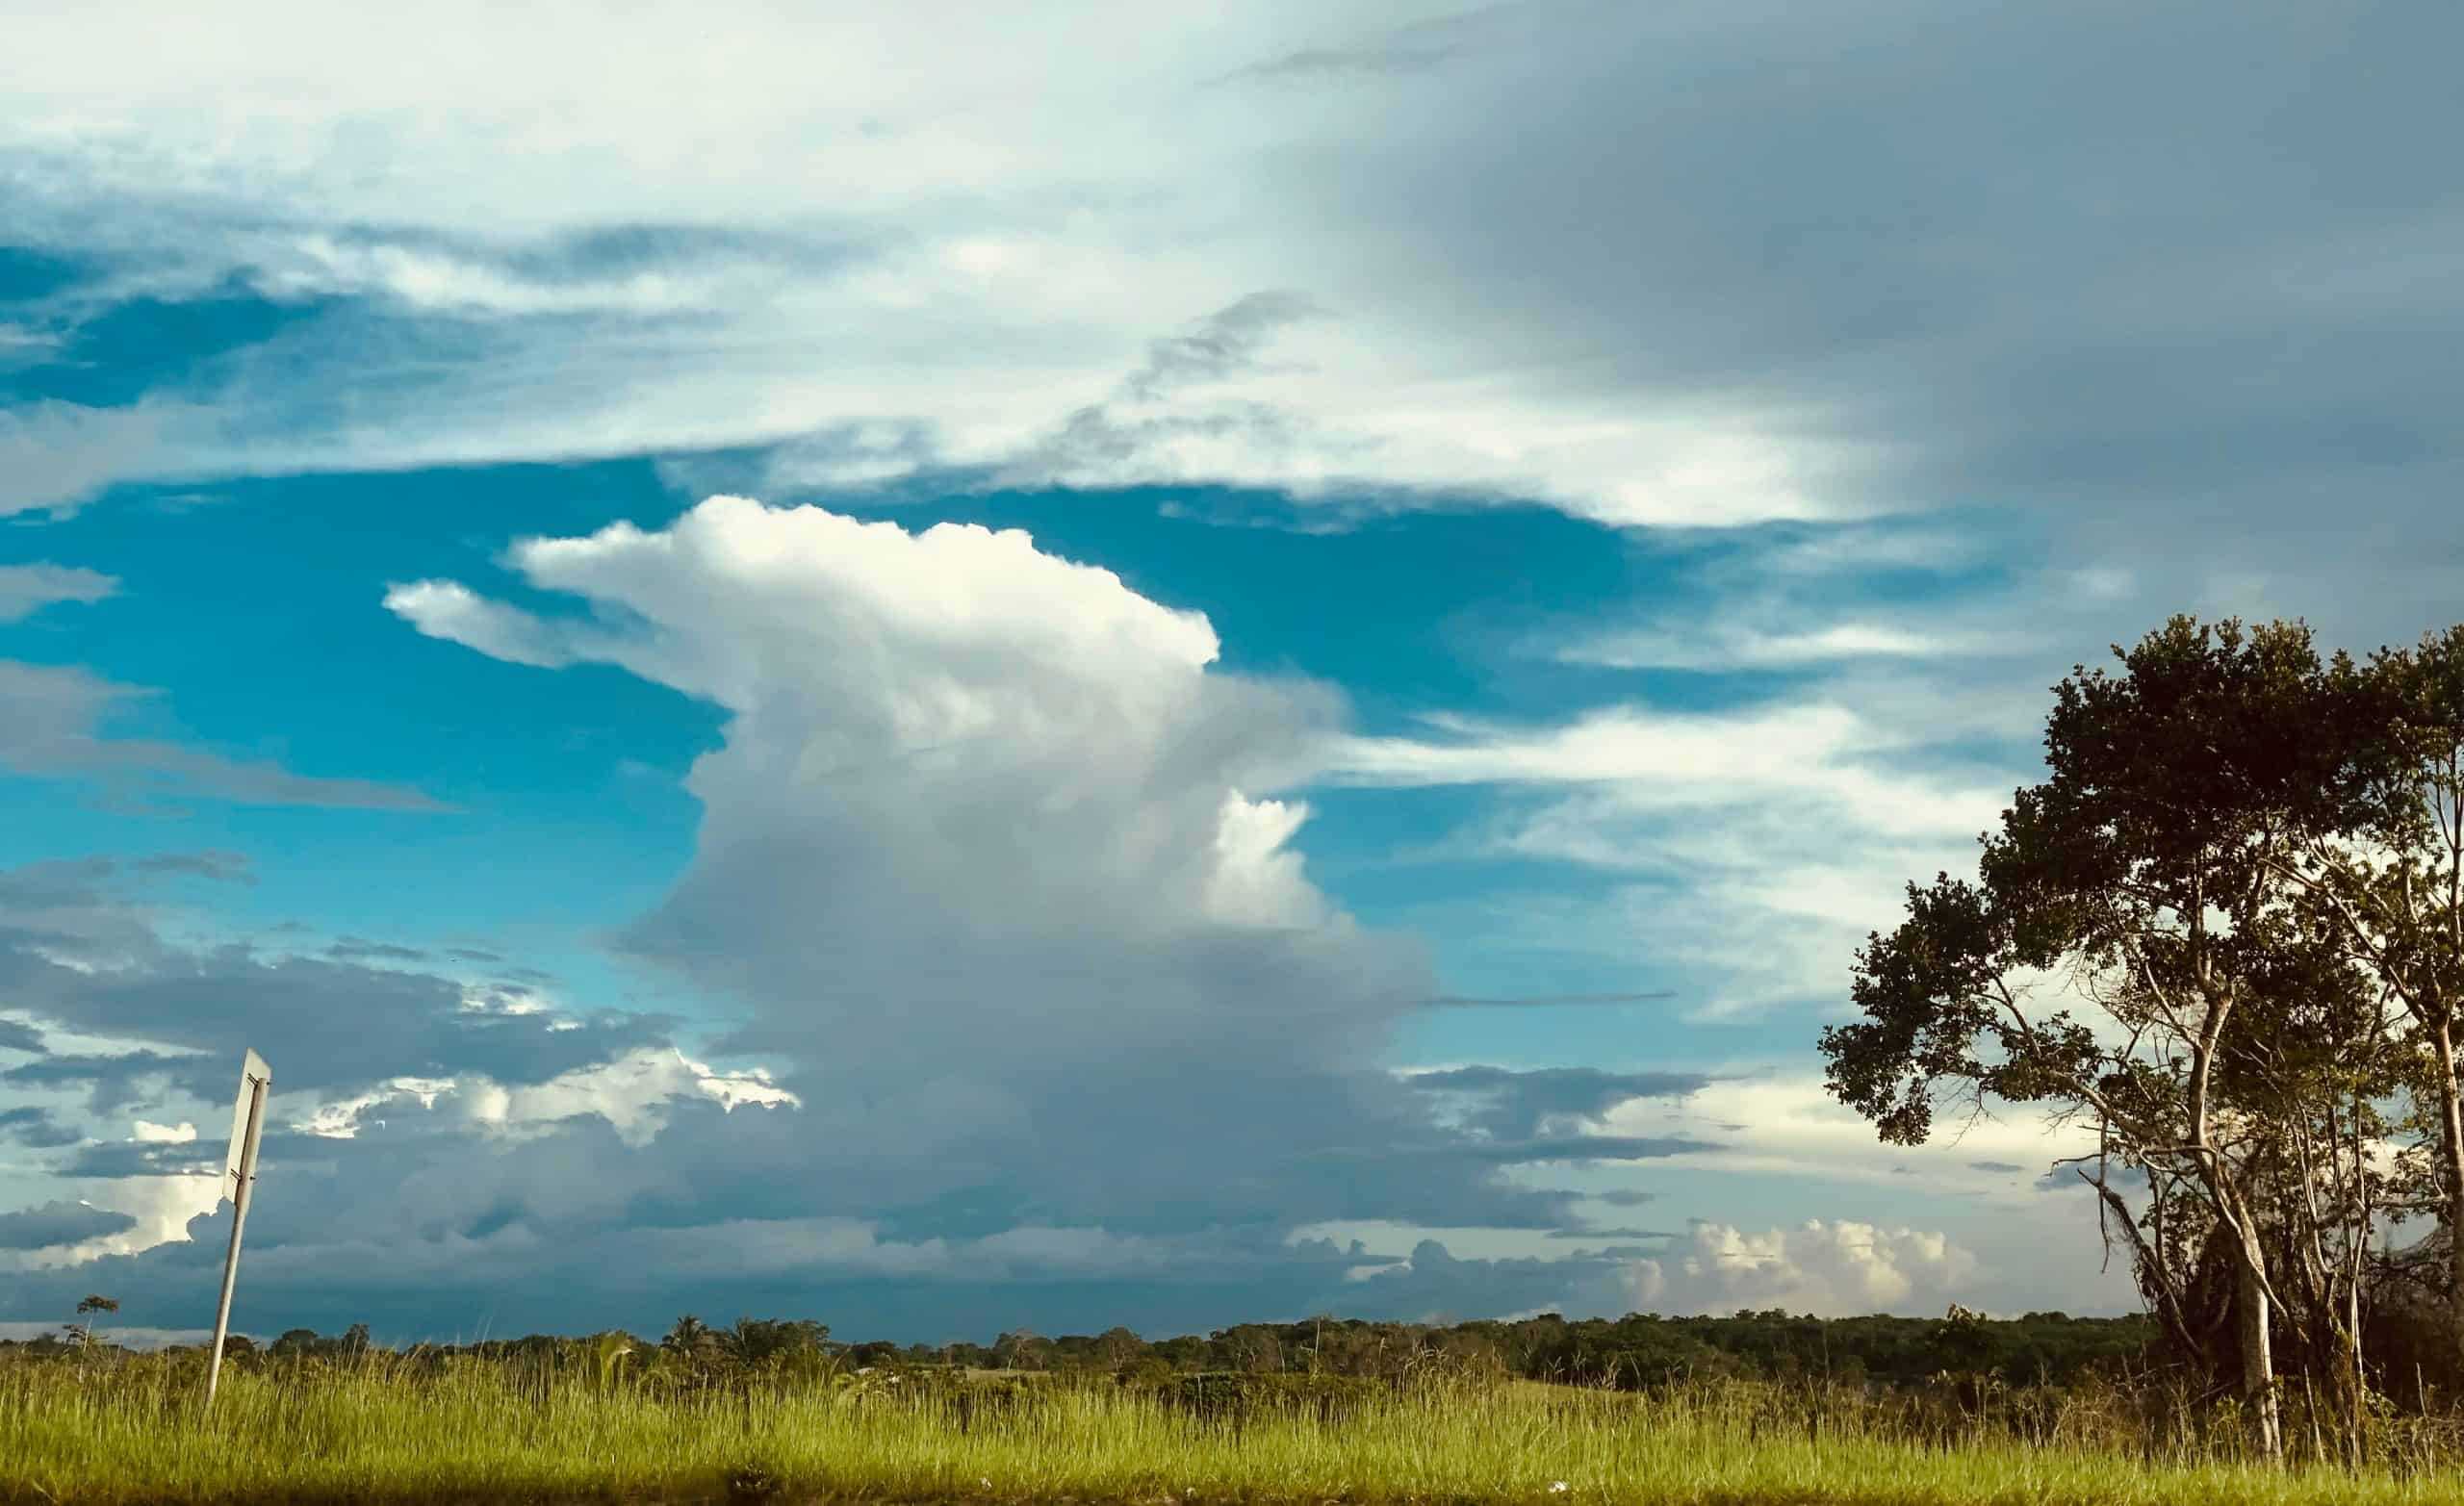 Guyana landscape of a meadow, tree, and clouds